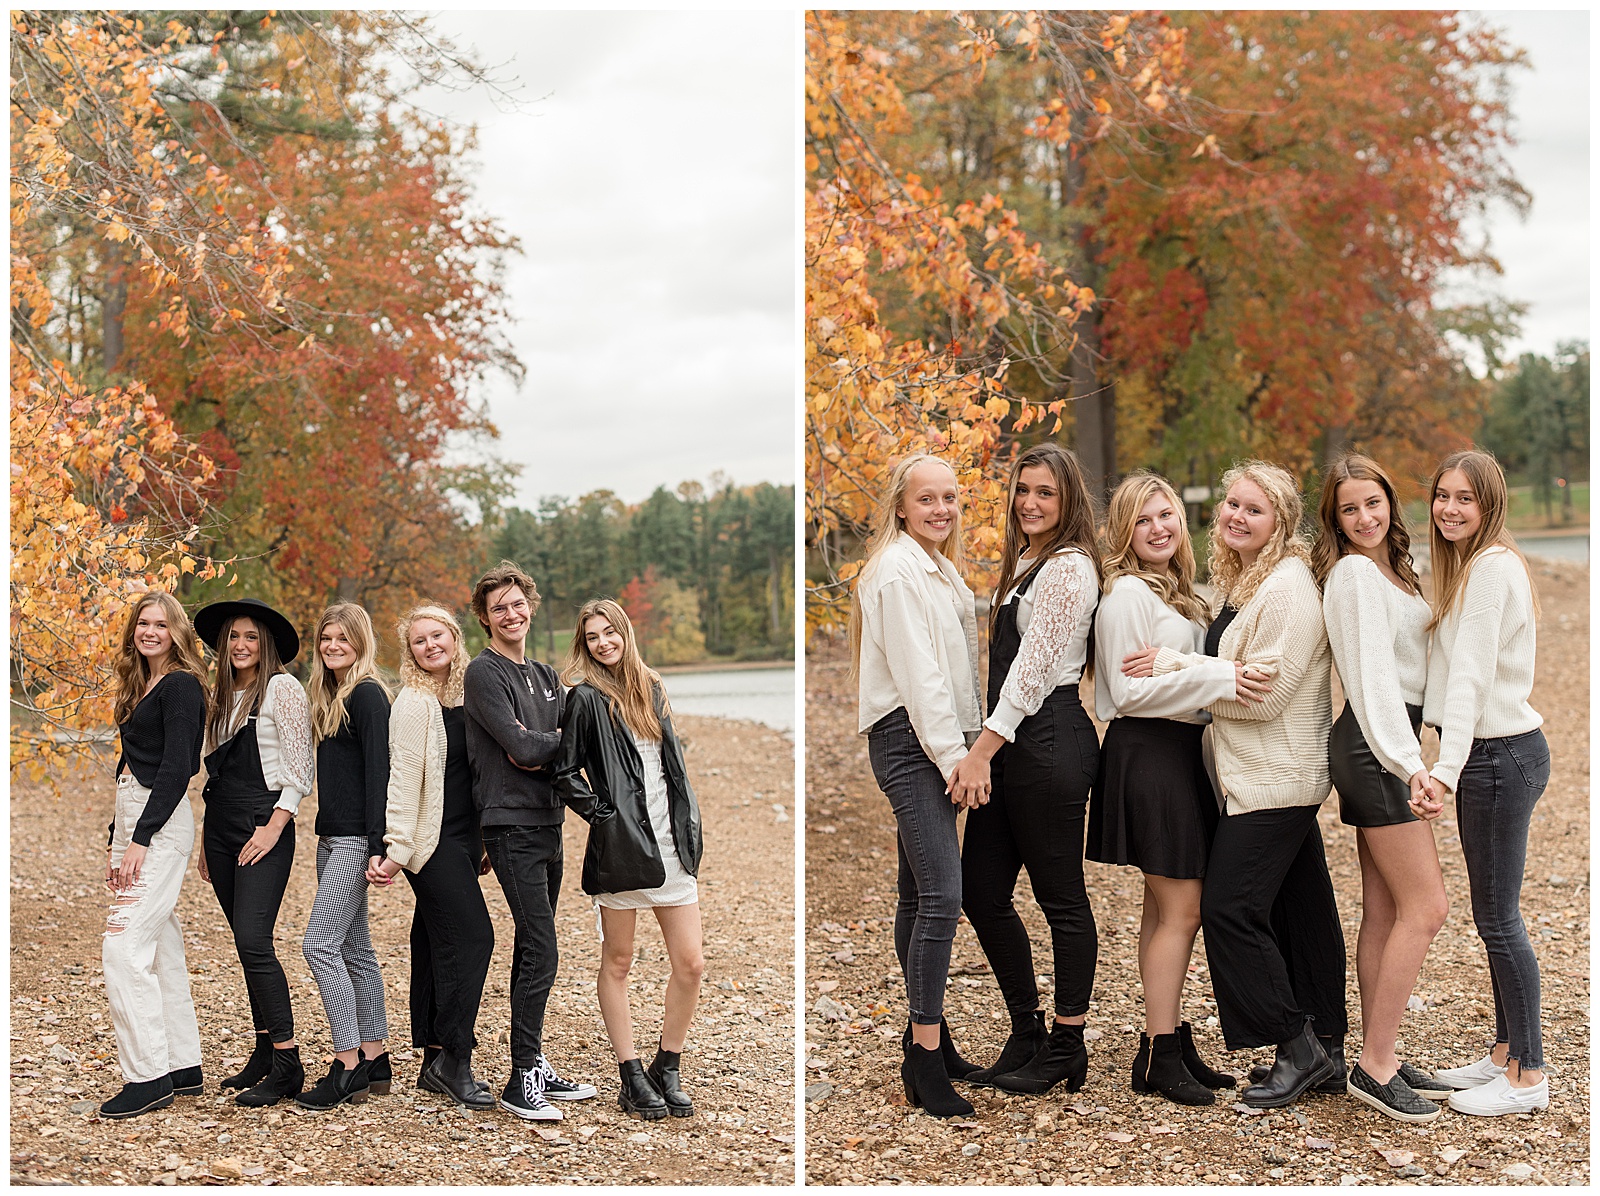 class of 2022 senior spokesmodels standing close together with some facing right and some facing left on fall day